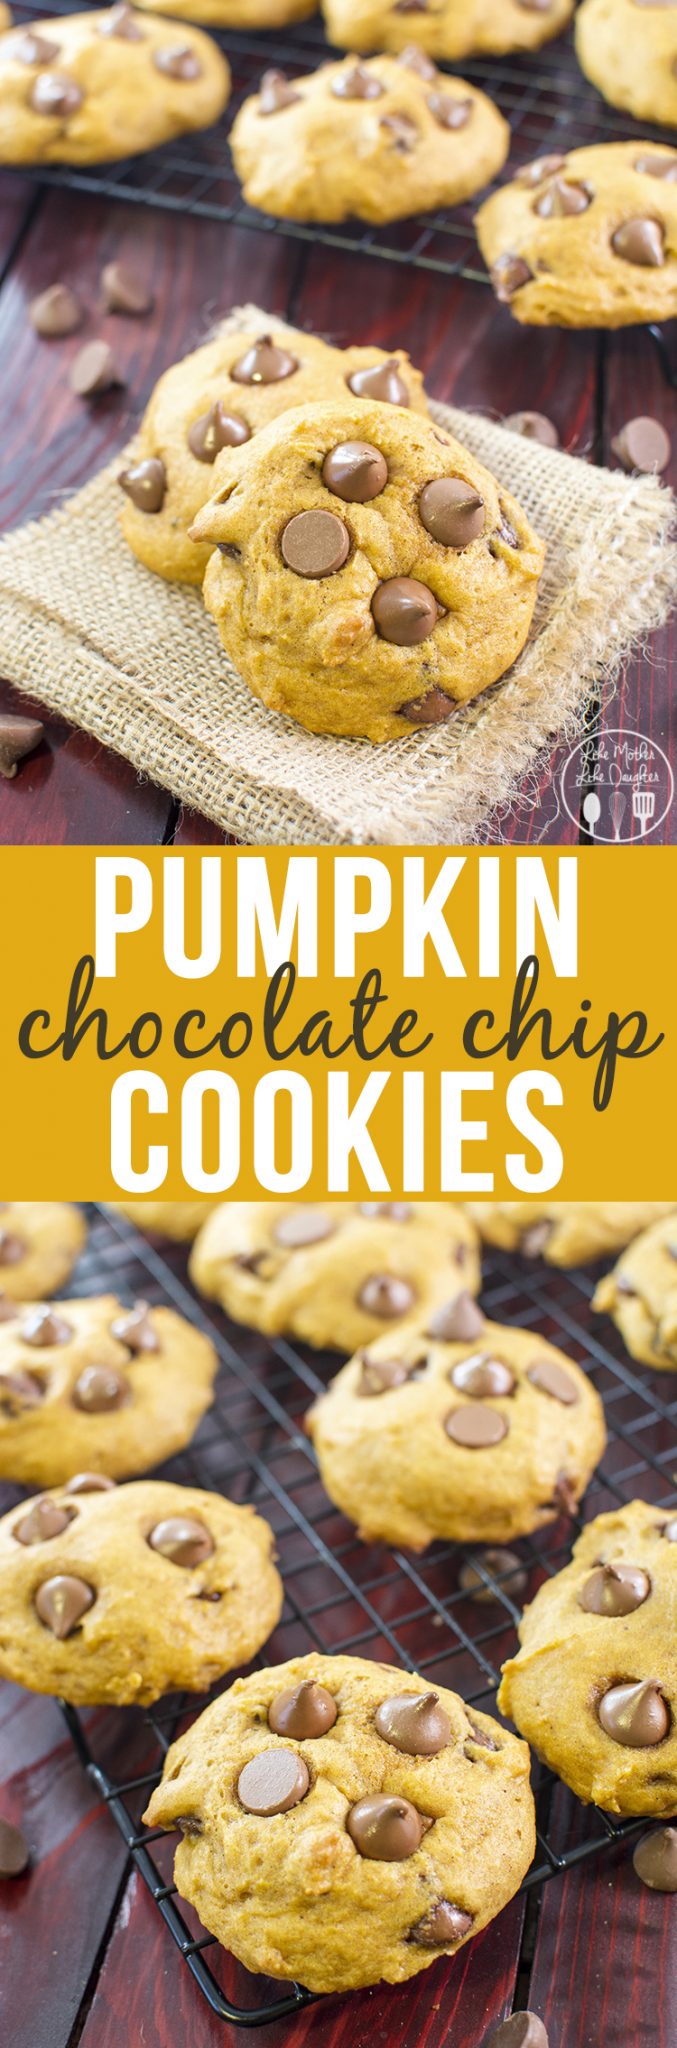 Pumpkin Chocolate Chip Cookies - These are the perfect soft baked fall cookies full of pumpkiny goodness and stuffed full of chocolate chips.